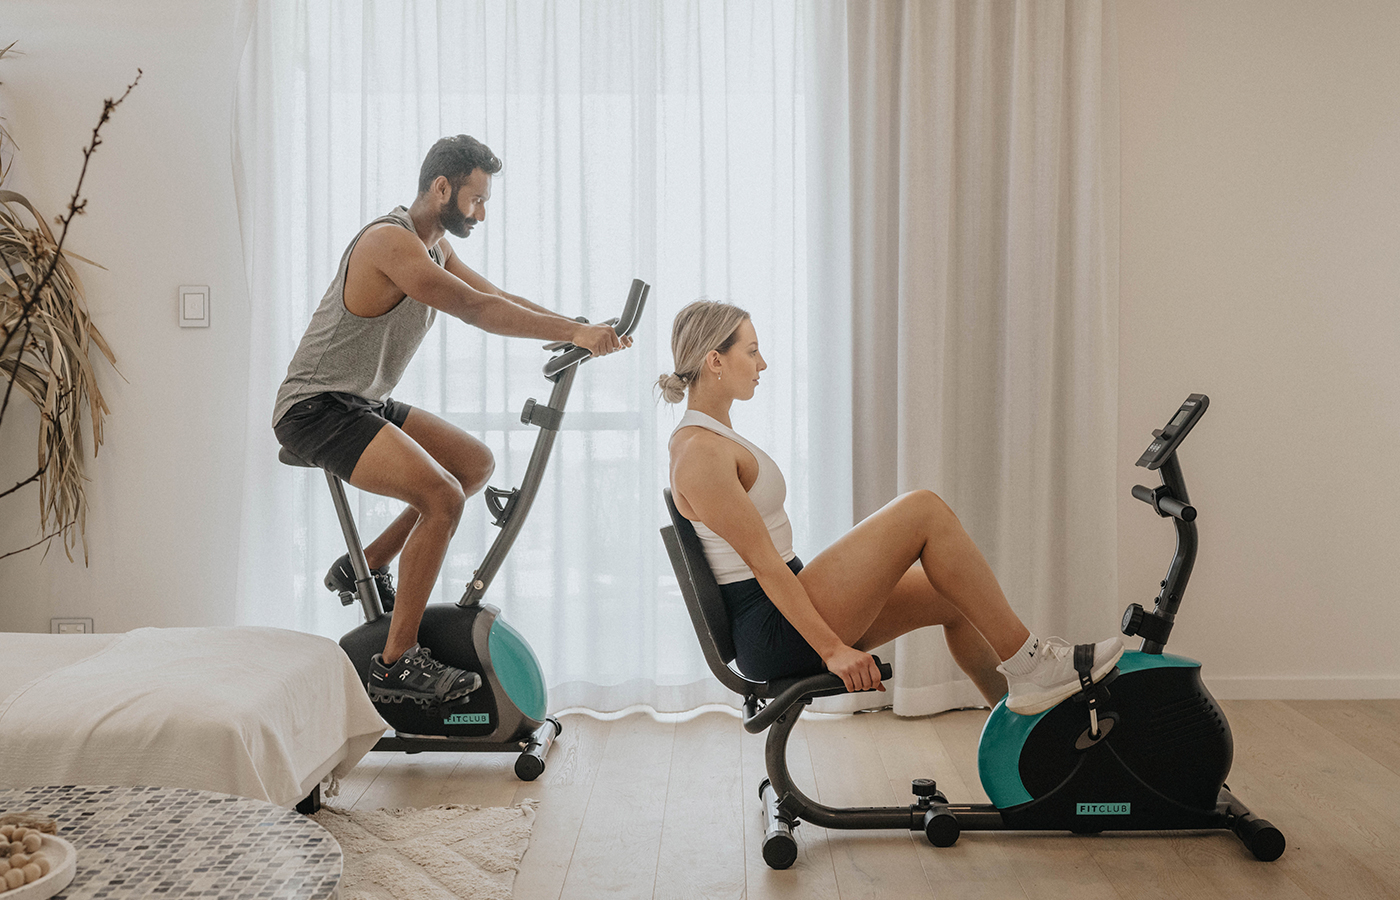 Two young people performing spin bike interval training routines